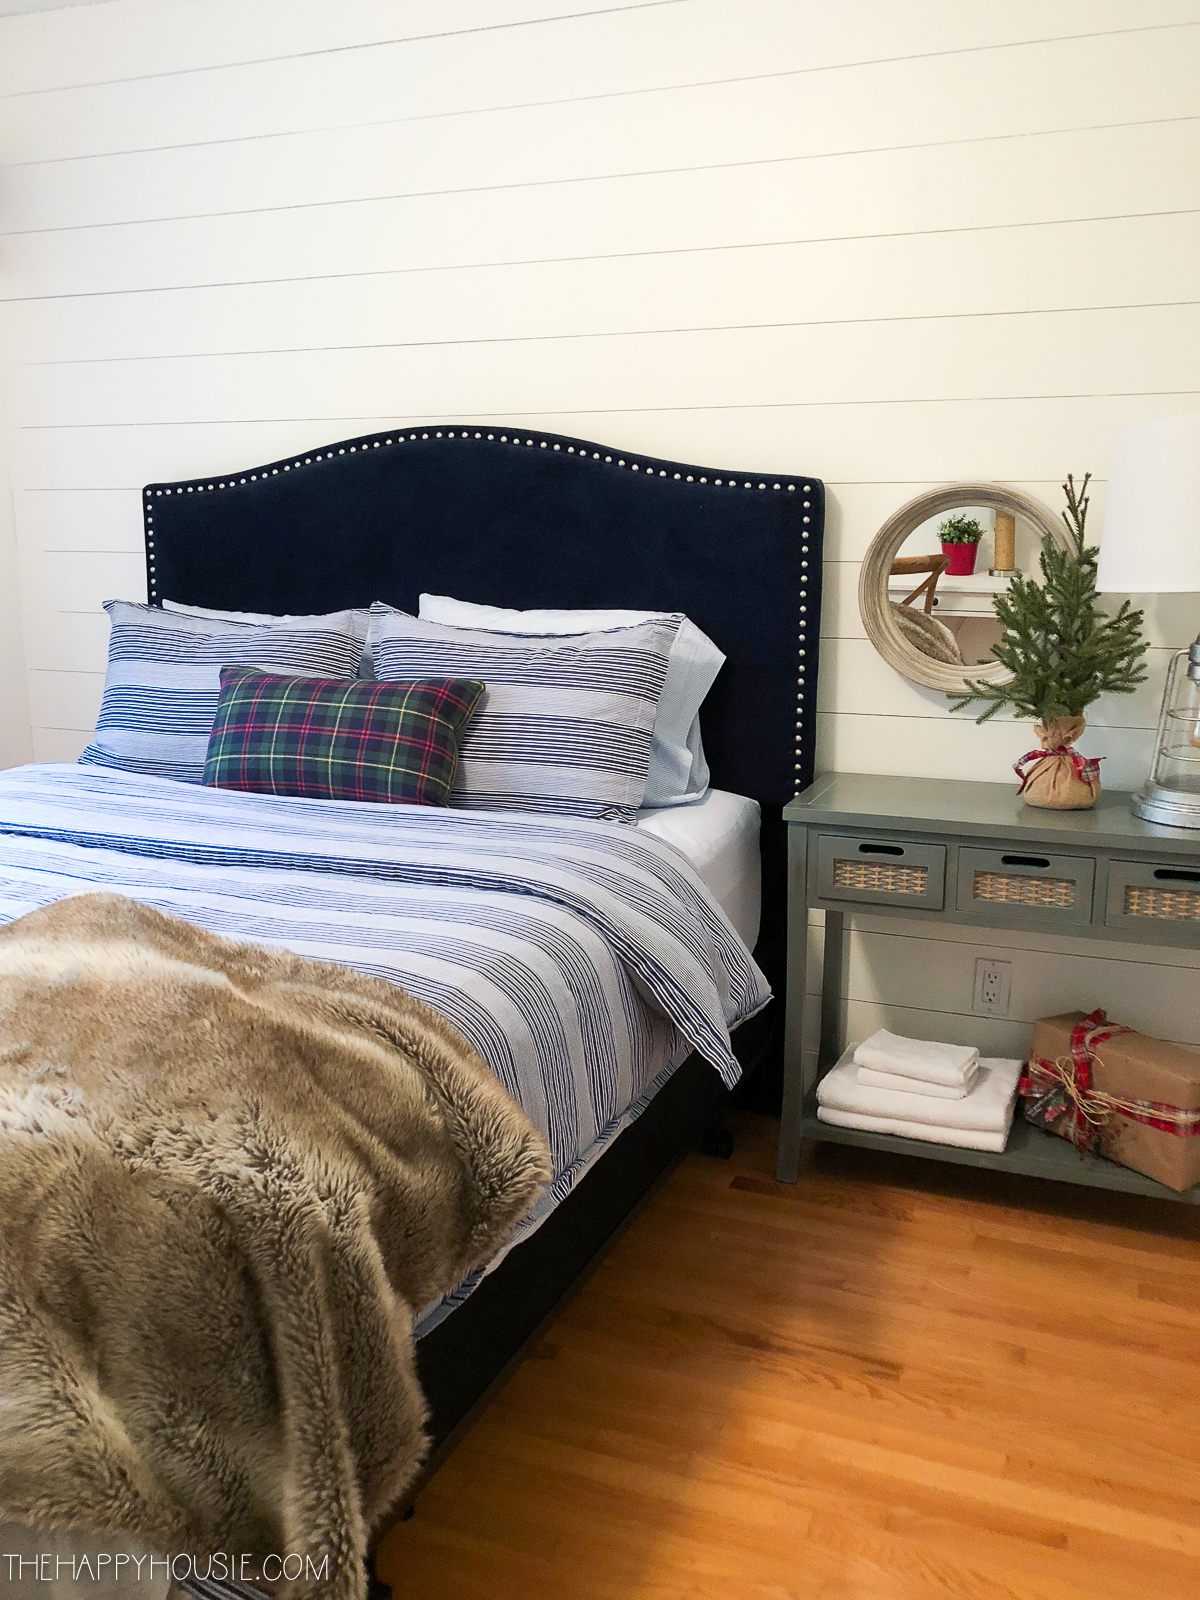 A fabric headboard with rivets on it in a dark blue, with a small table beside it and a small Christmas tree on it.